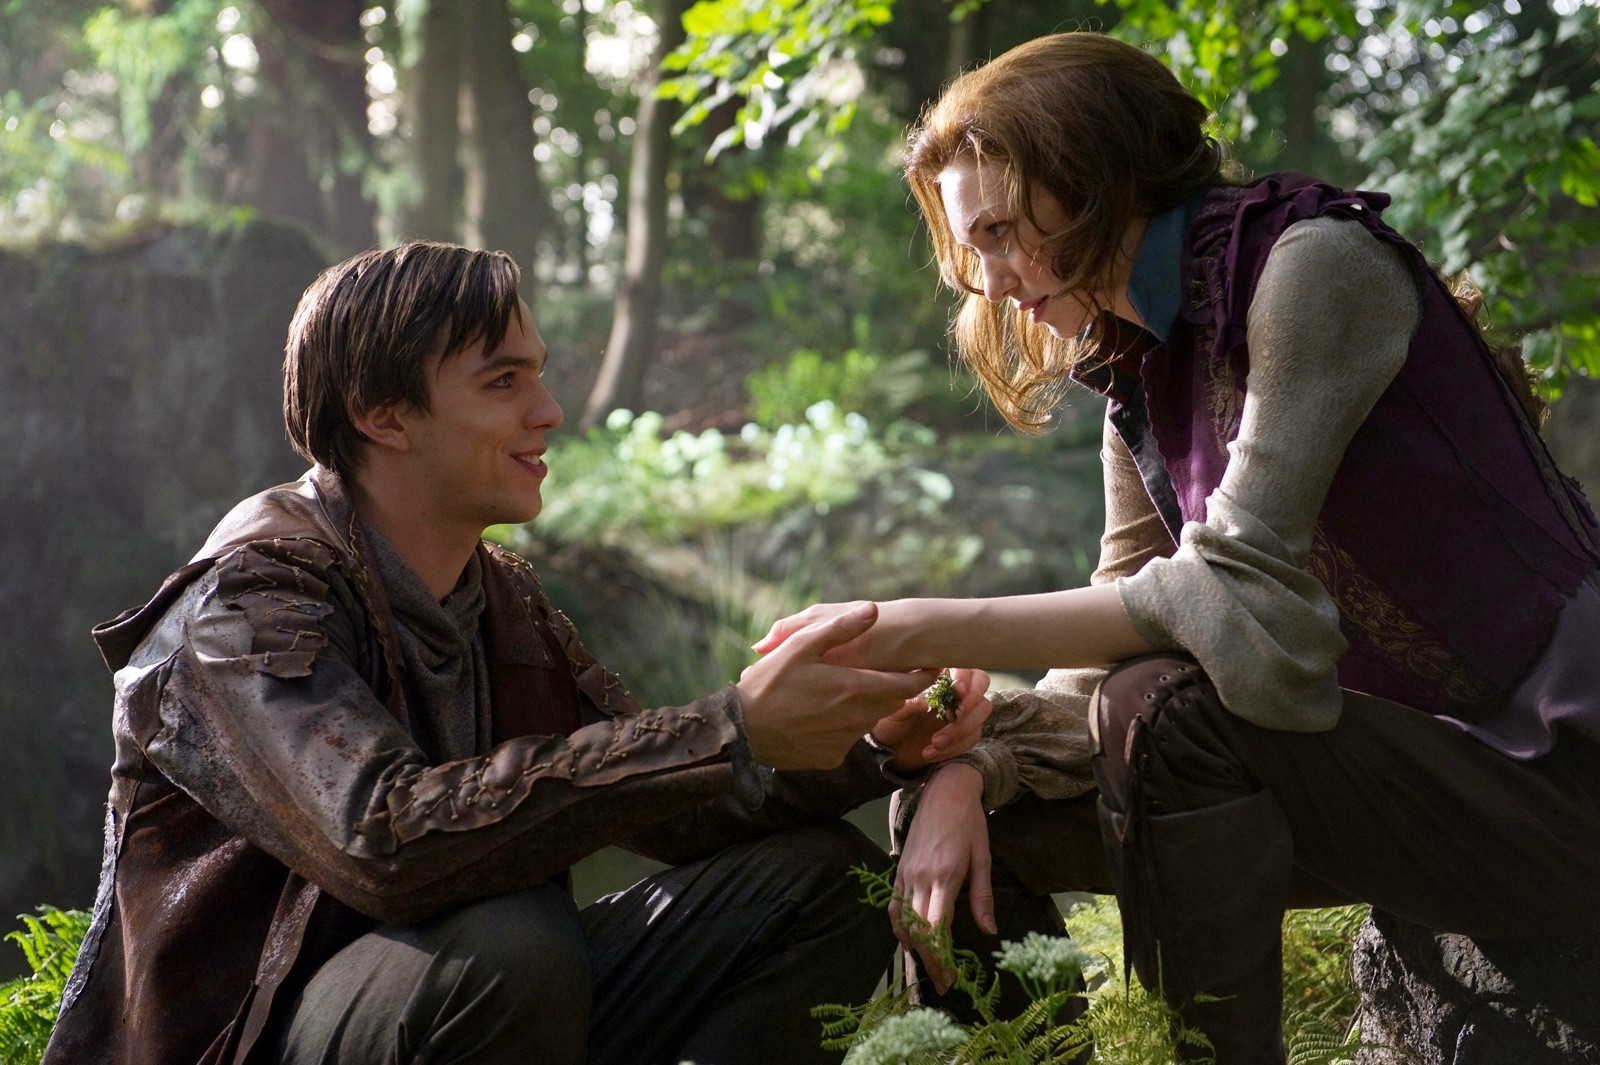 Nicholas Hoult stars as Jack and Eleanor Tomlinson stars as Princess Isabelle in Warner Bros. Pictures' Jack the Giant Slayer (2013)